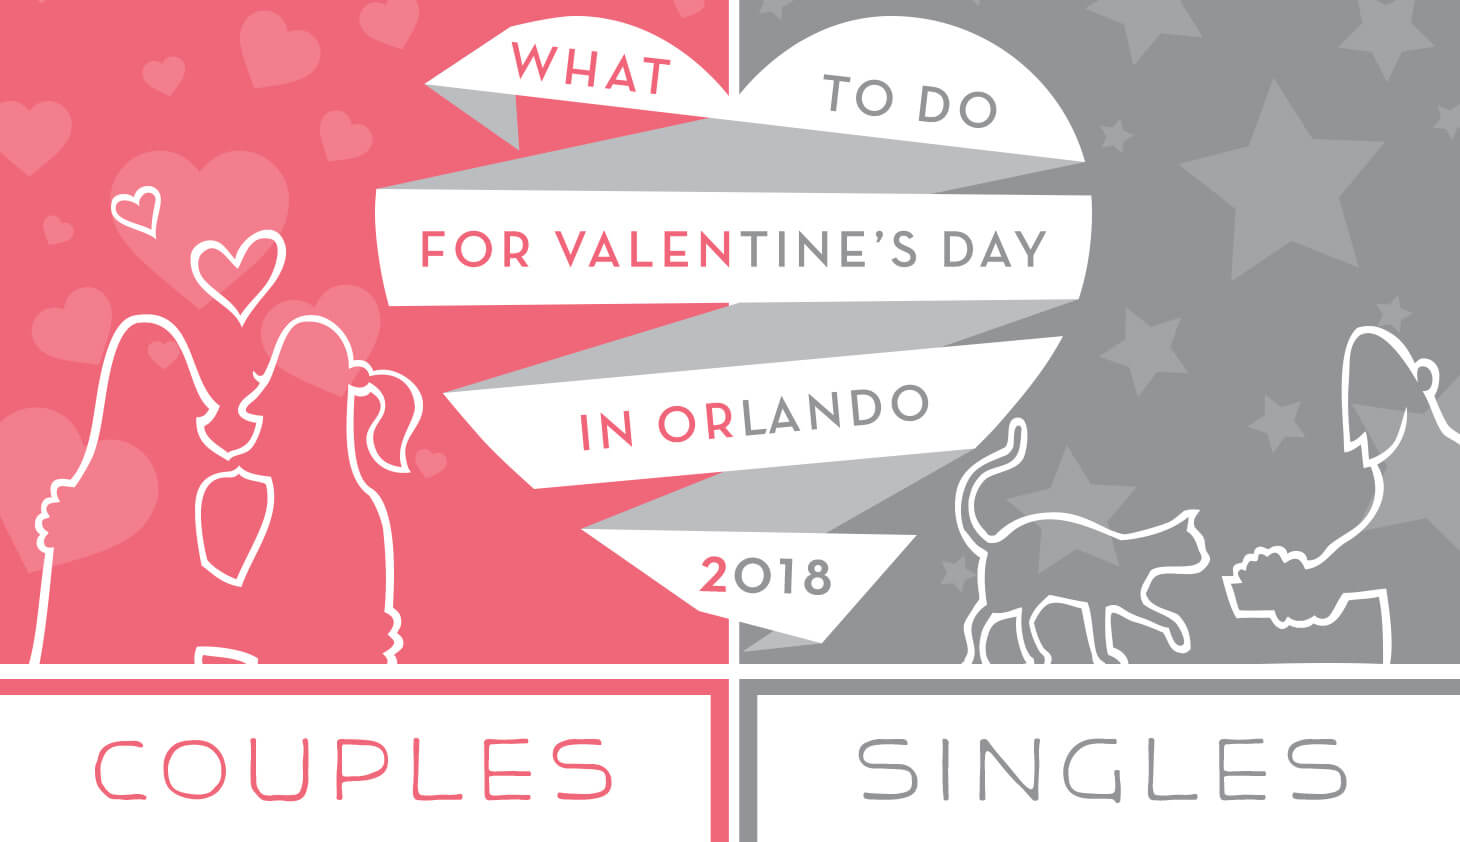 Things To Do For Valentine's Day In Orlando 2018